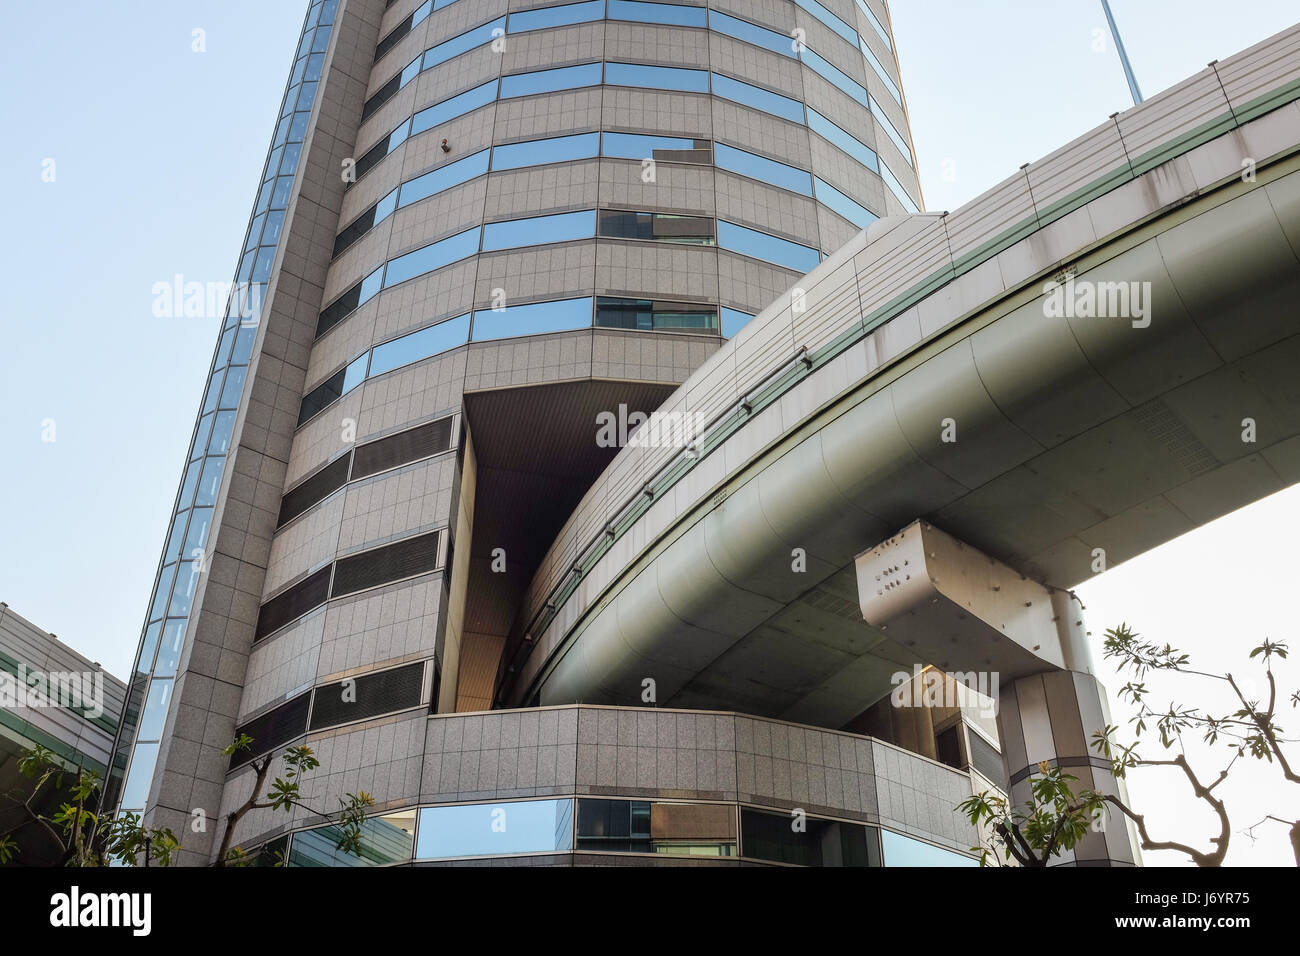 The Gate Tower Building in Osaka, Japan. Stock Photo